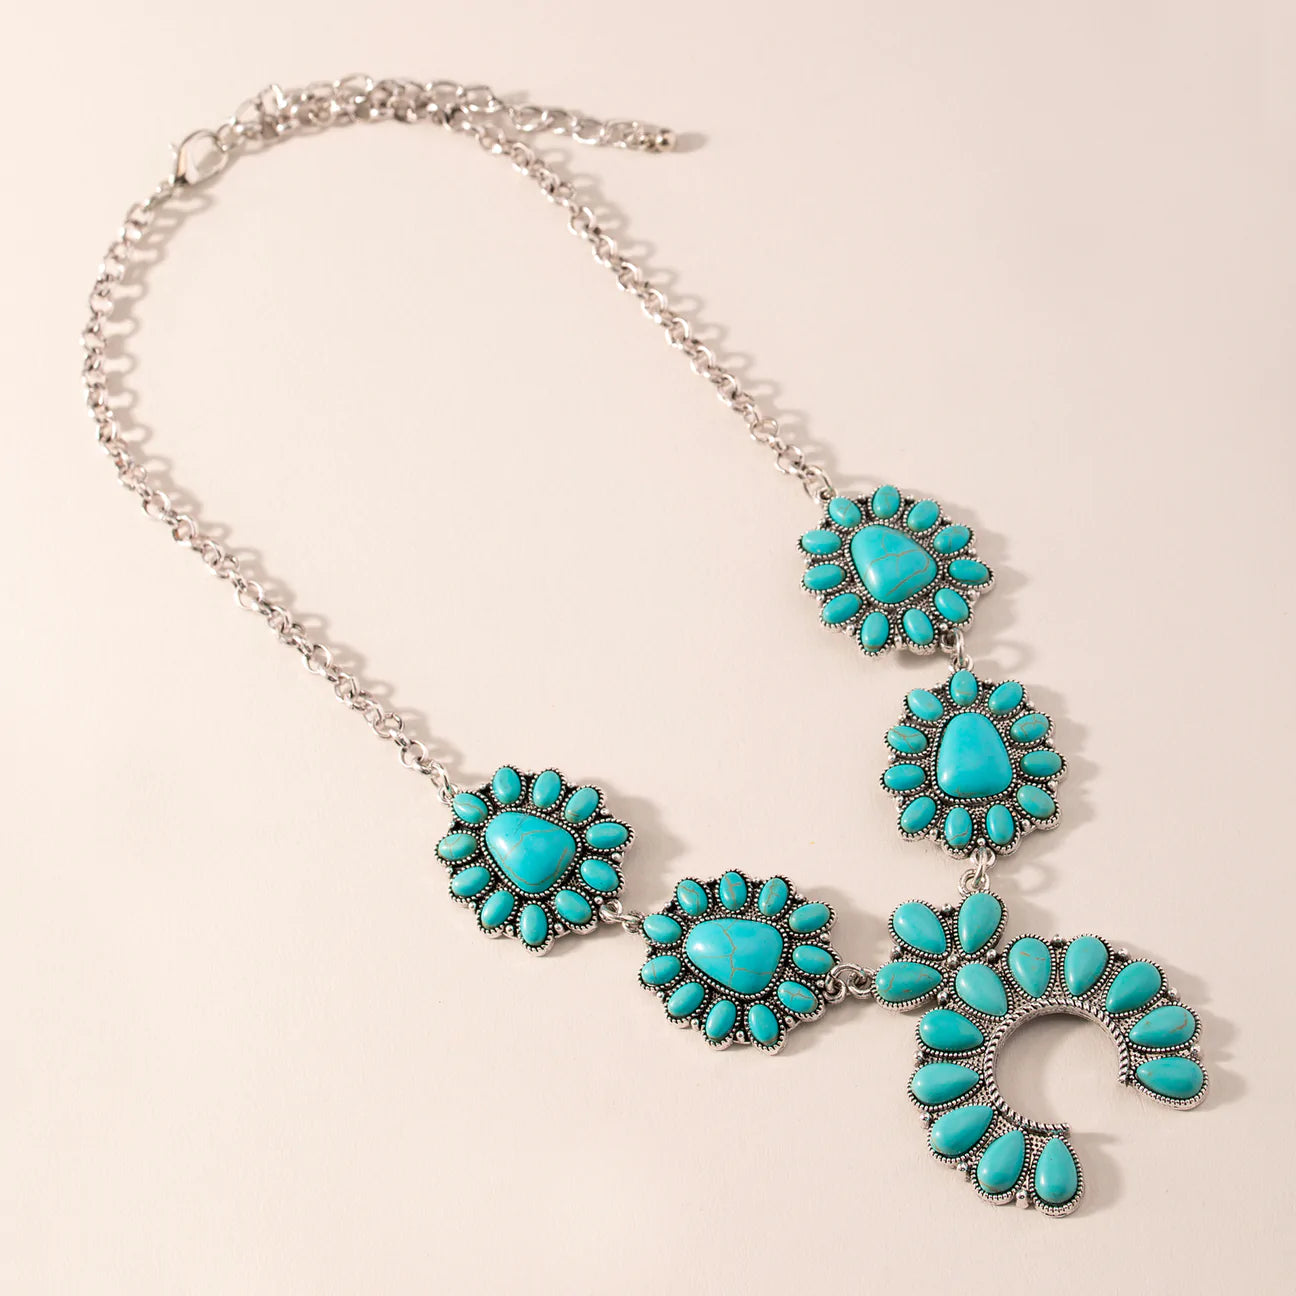 ‘ALLY’ Necklace & Earring Set